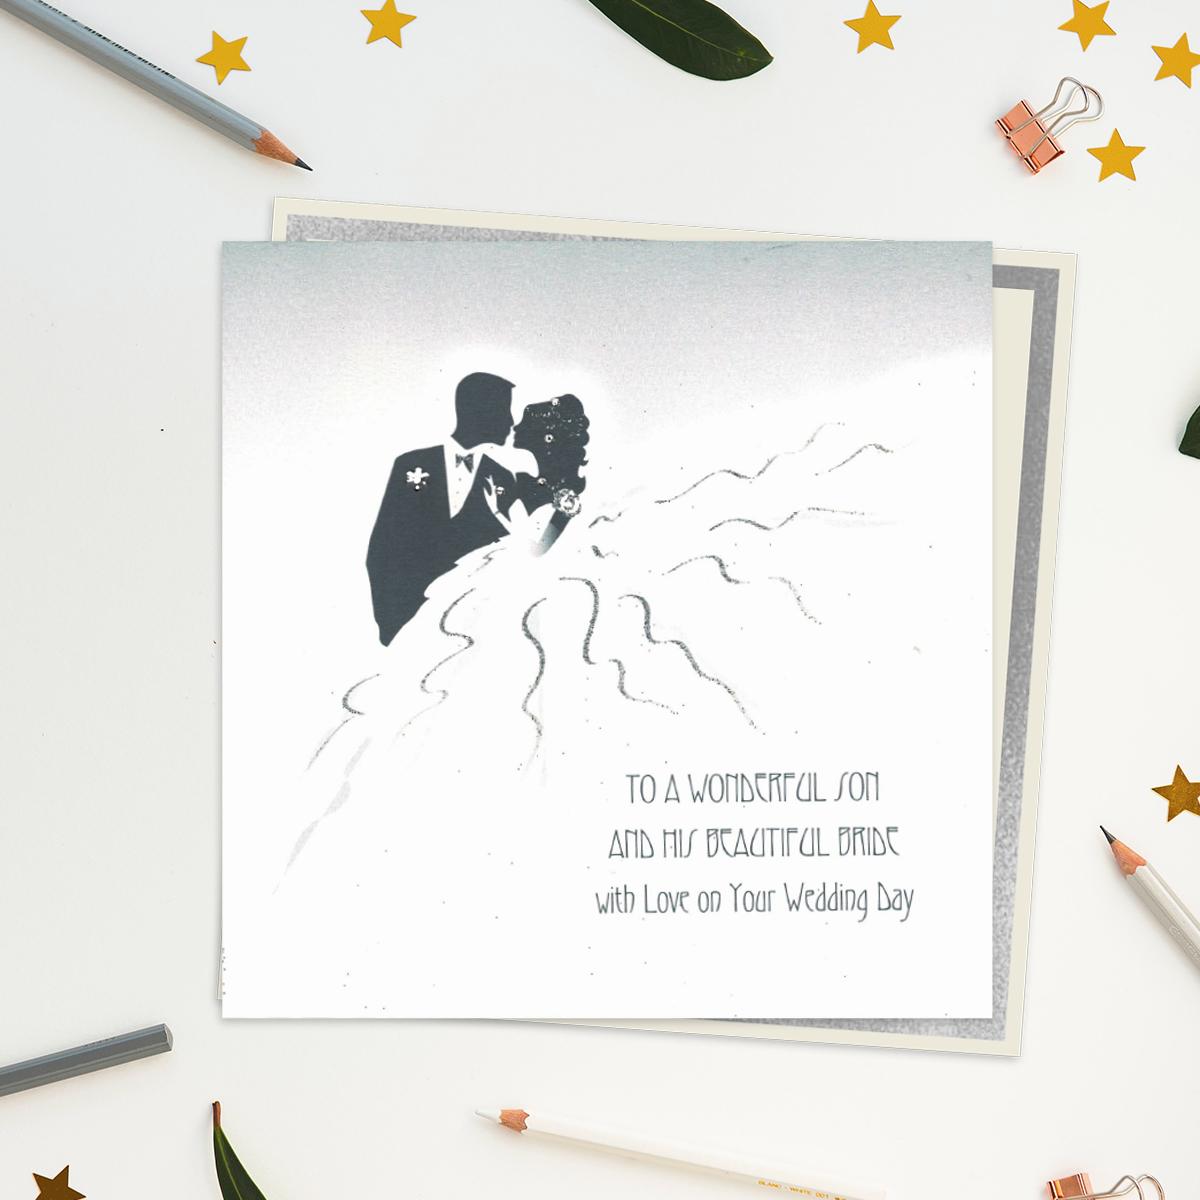 Stunning, Luxury, Handcrafted Wedding Day Design For Son And His Beautiful Bride. Image Of Couple In Silhouette With Added Jewel Embellishments. Blank Inside For Own Message. Warm White Envelope With Silver Border